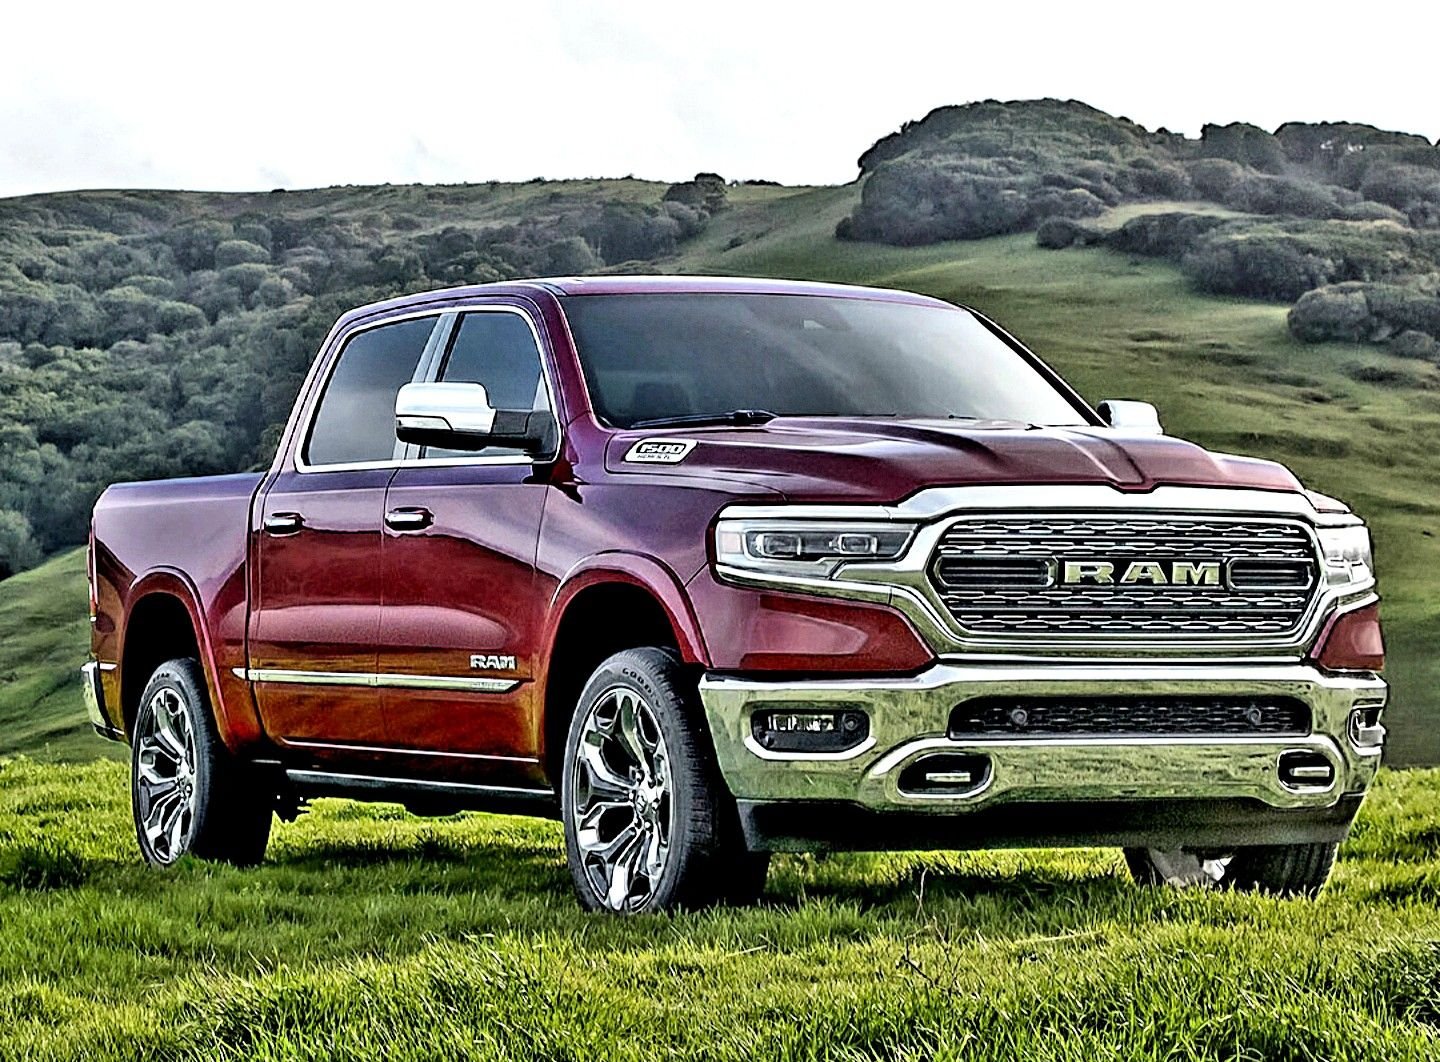 Limited 2019. Dodge Ram 1500. Dodge Ram 1500 2019. Dodge Ram 2019. Dodge Ram 1500 Limited.